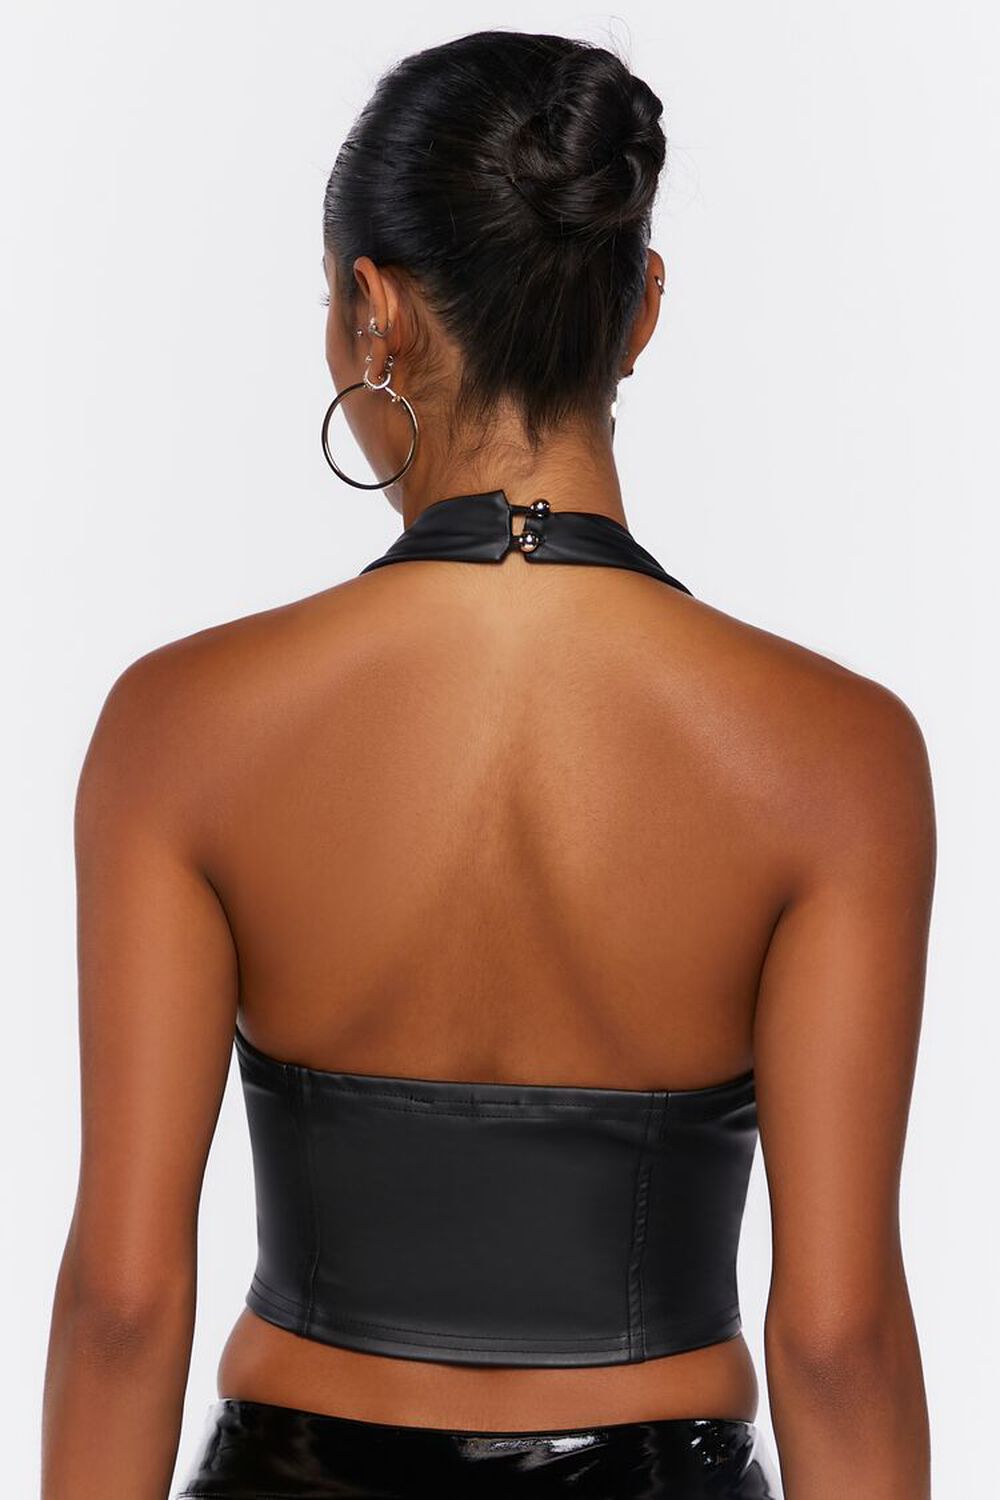 Forever 21 Faux Leather Halter Crop Top, $14, Forever 21